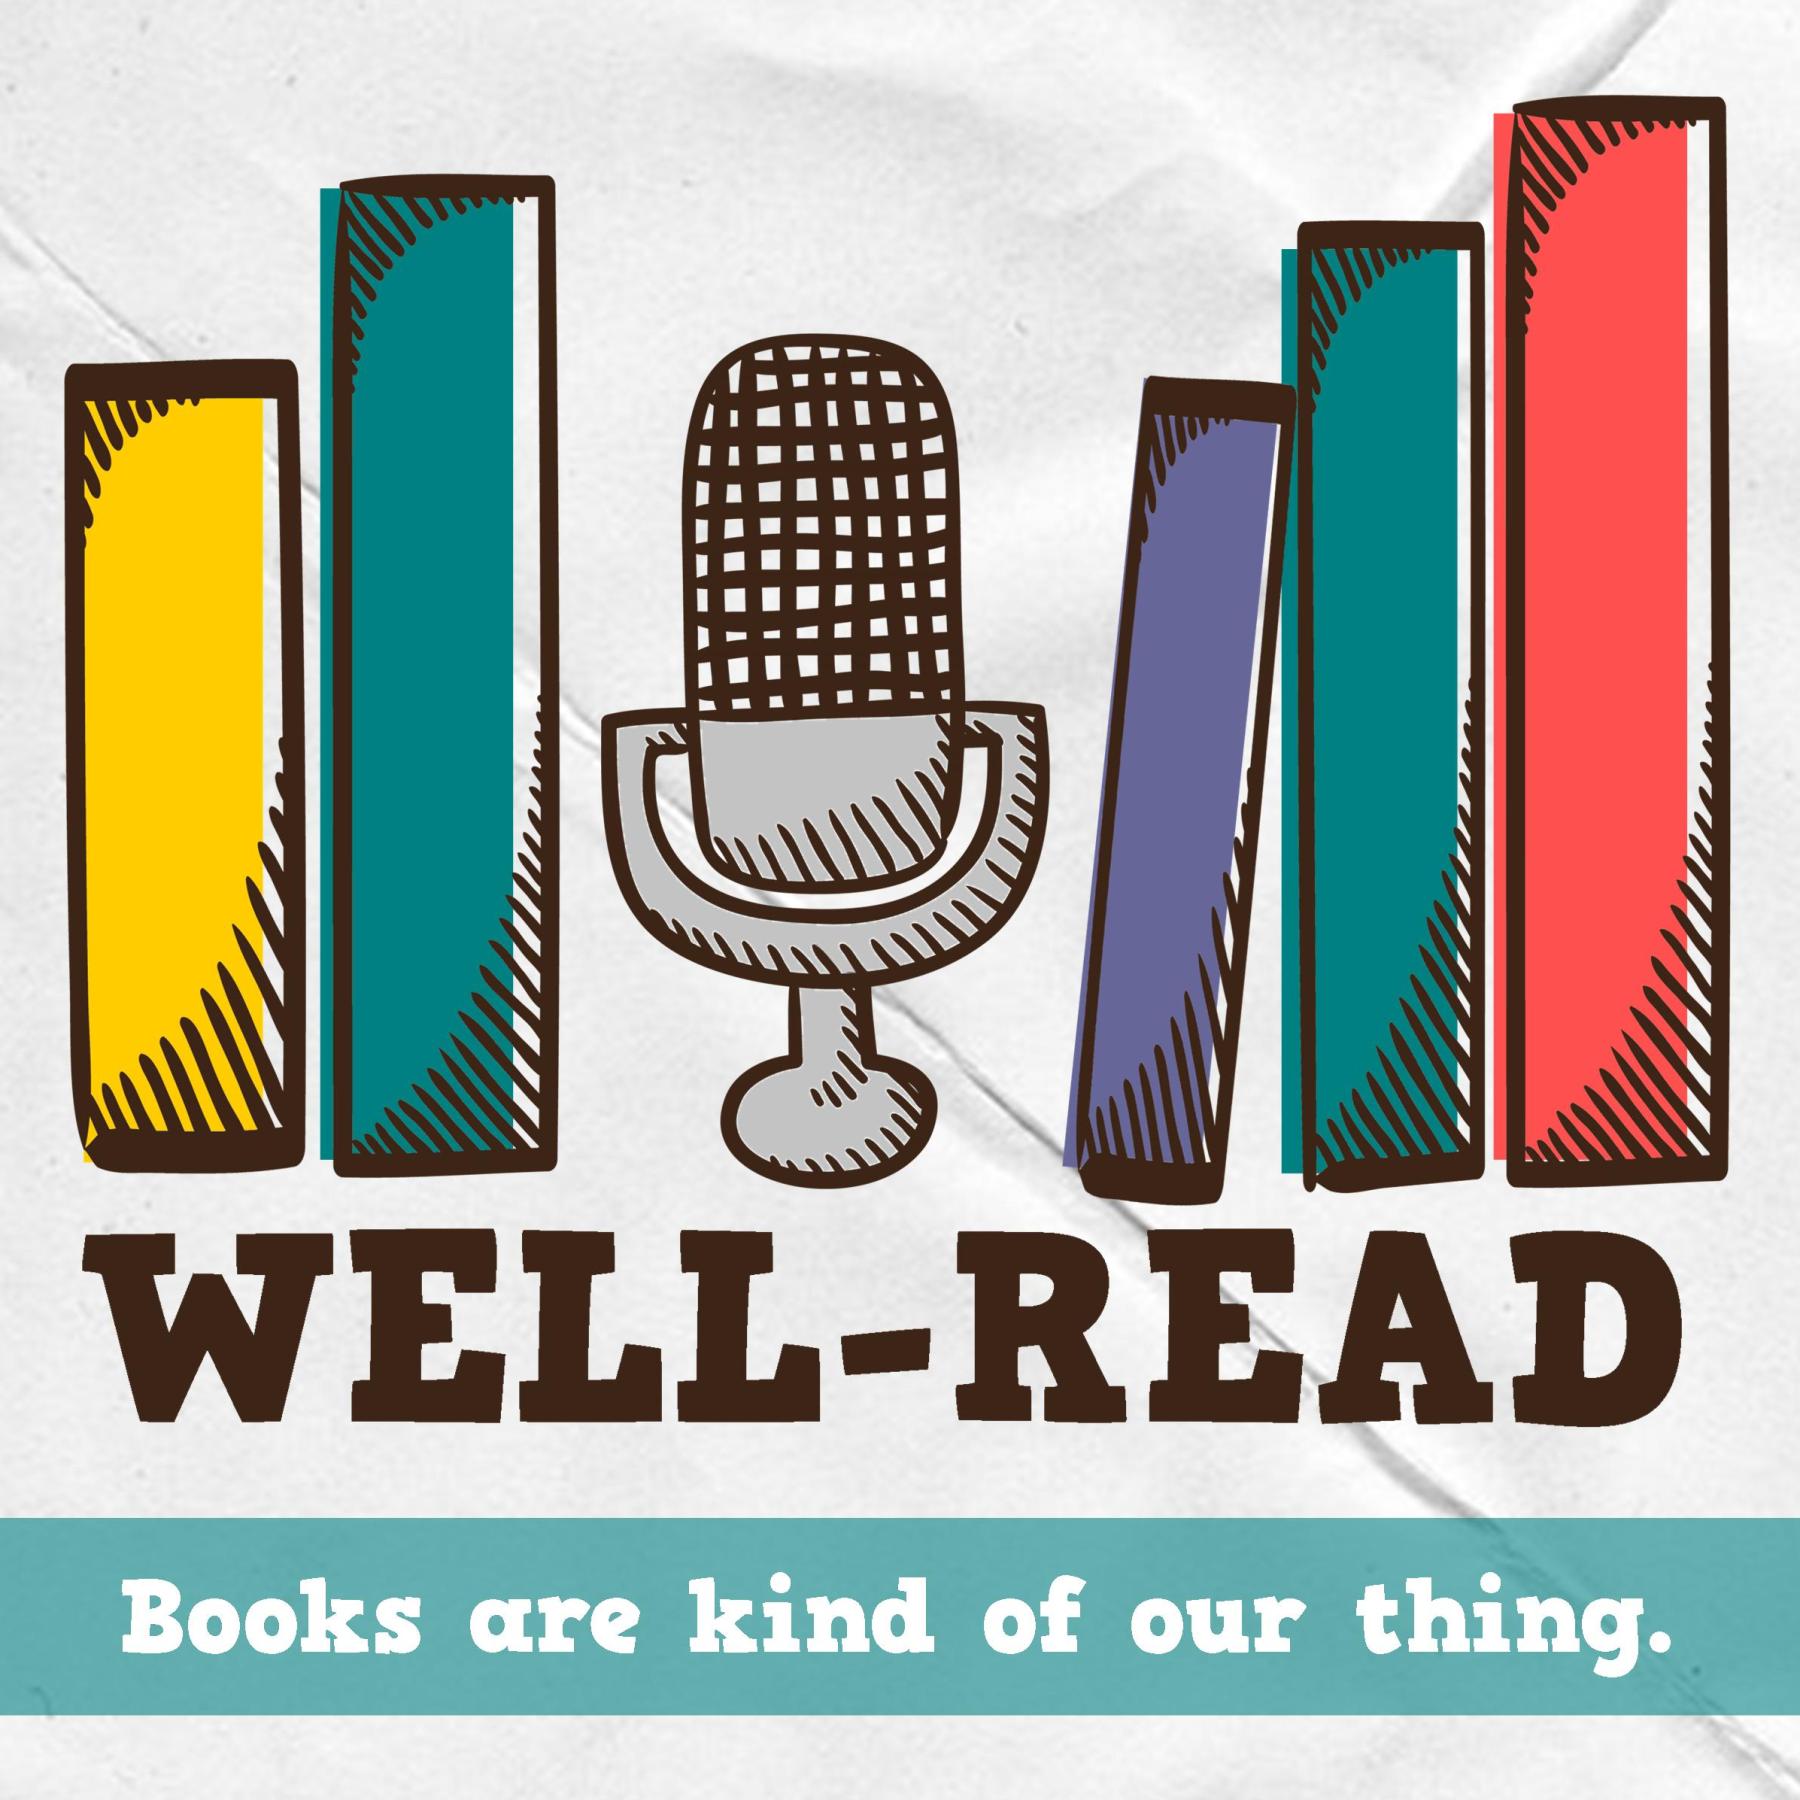 Well-Read Episode #44 - Spring 2017 Book Preview